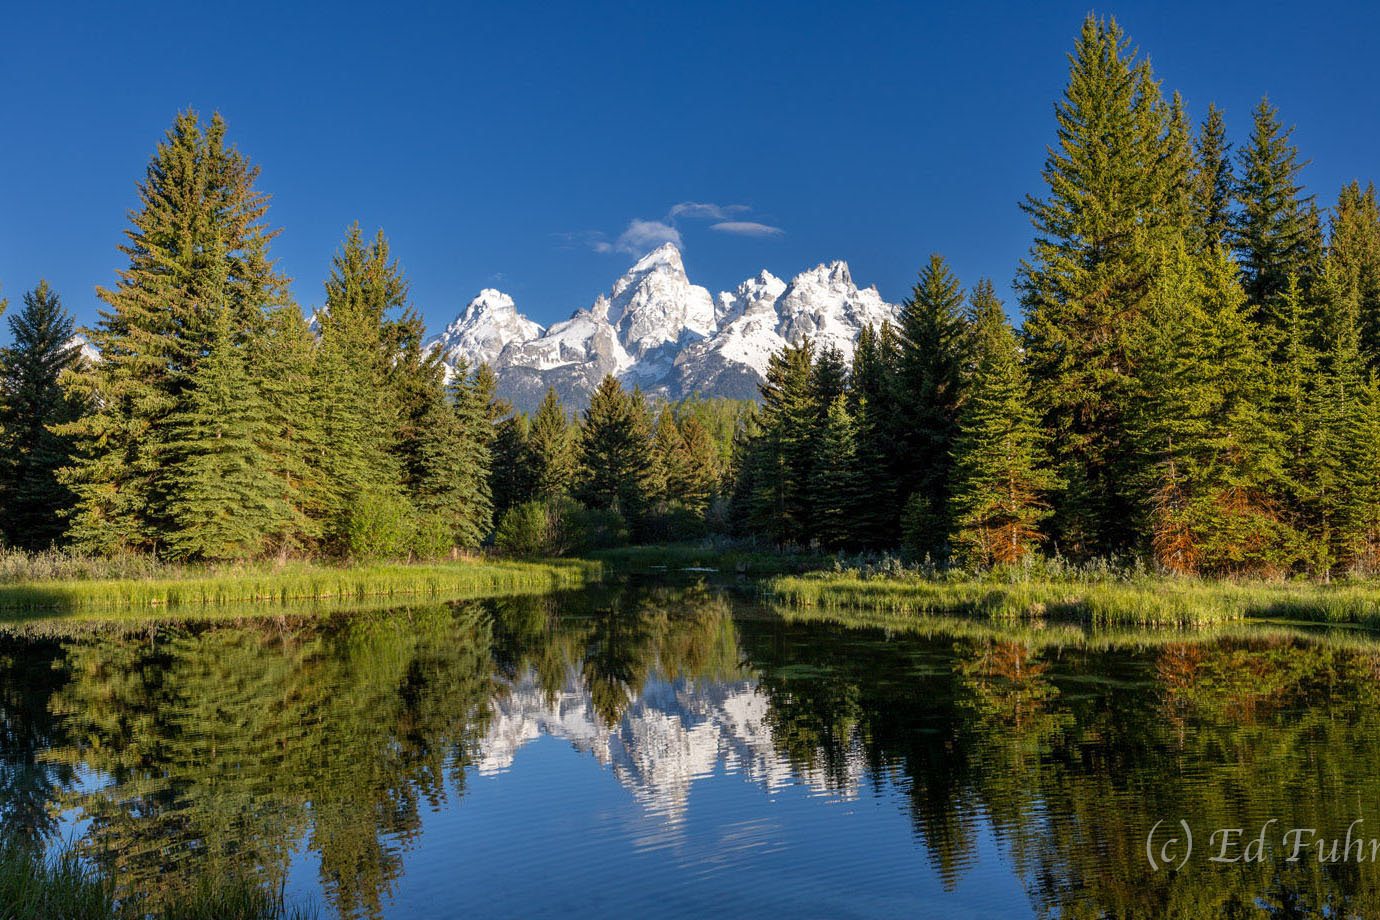 Still waters, bluebird blue skies, and winter's receding coat of snow create a gorgeous moment at the beaver ponds at Schwabacher...